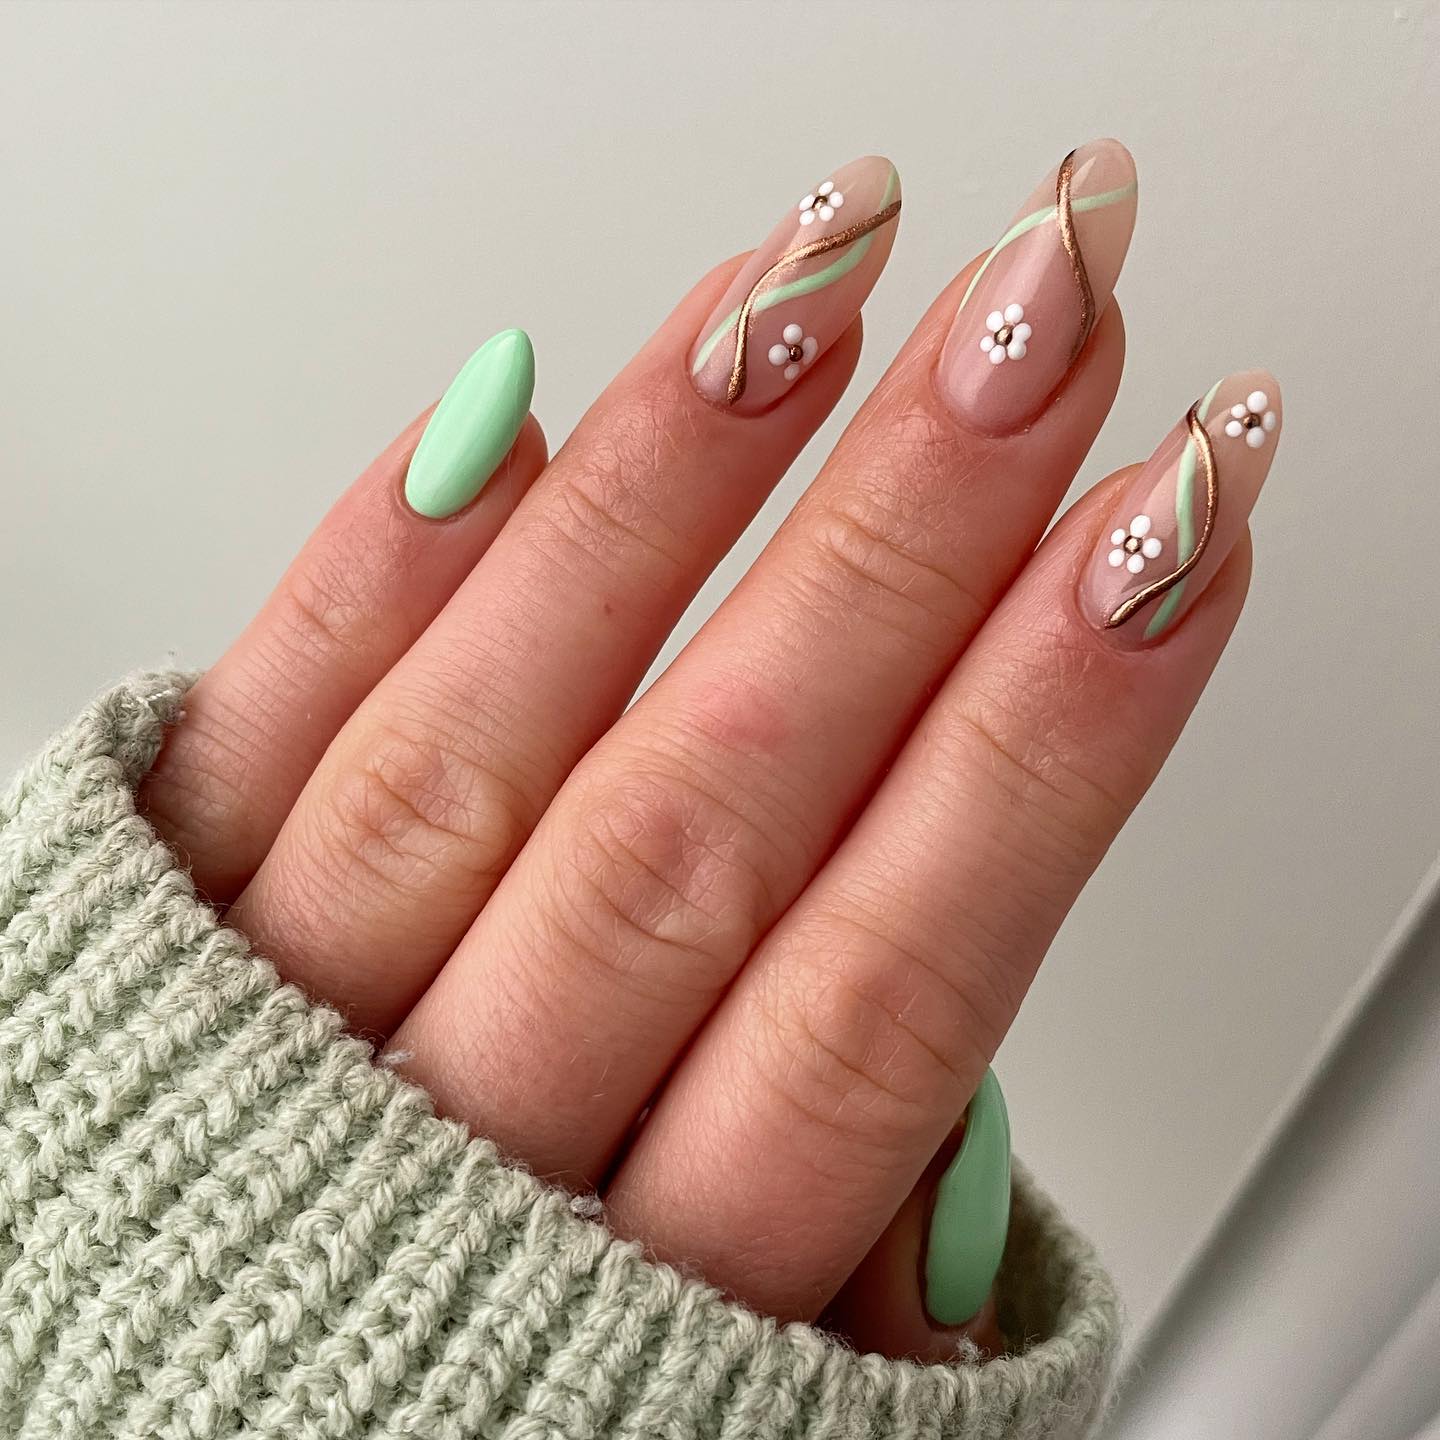 Long Spring Nail Design with Flowers and Swirls